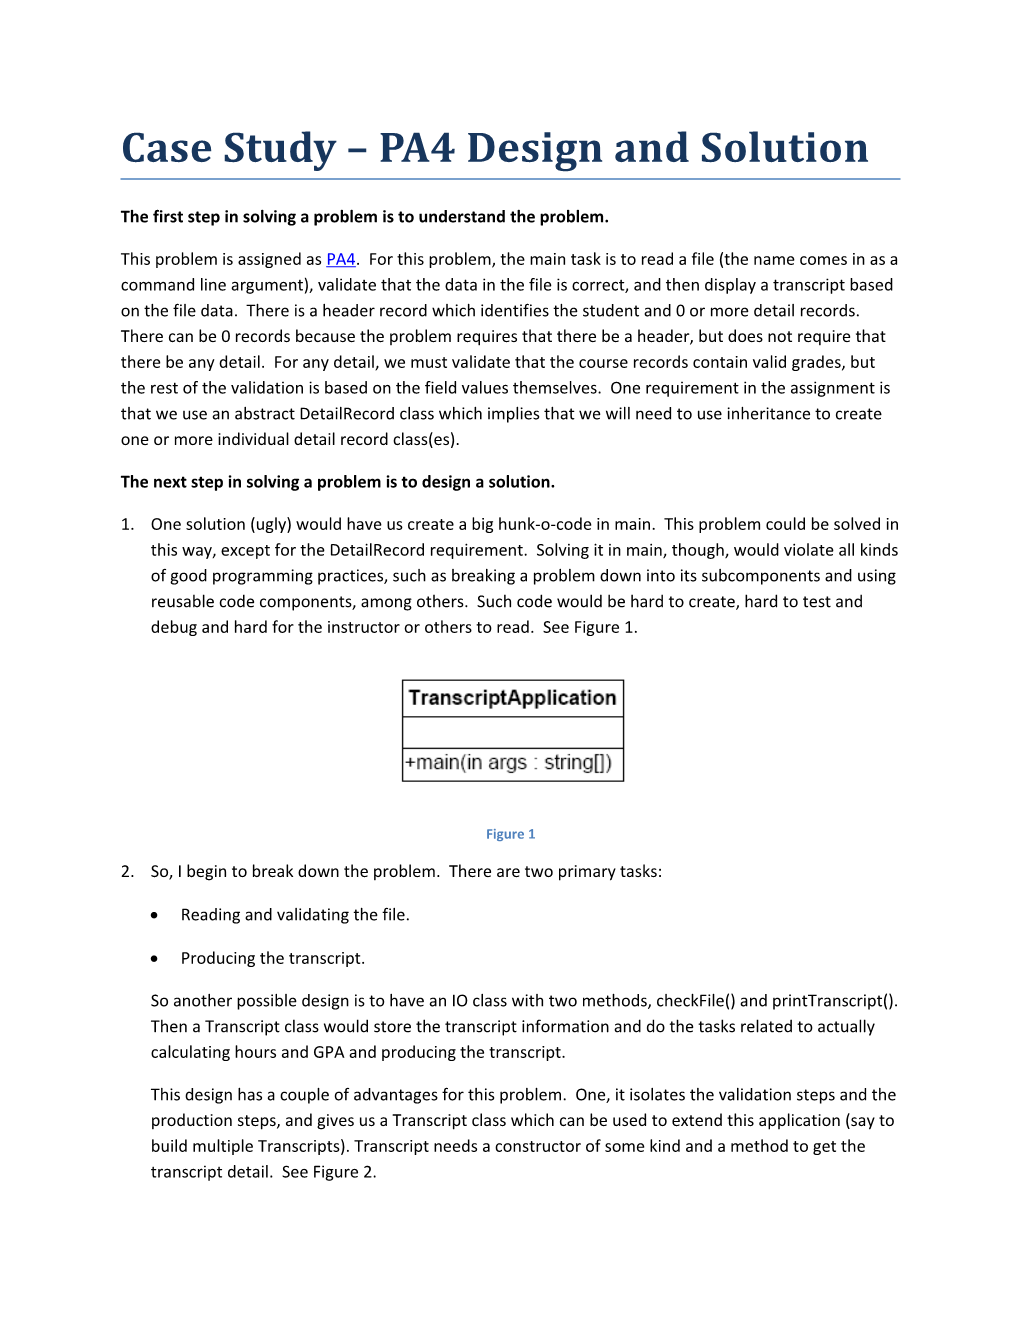 Case Study PA4 Design and Solution